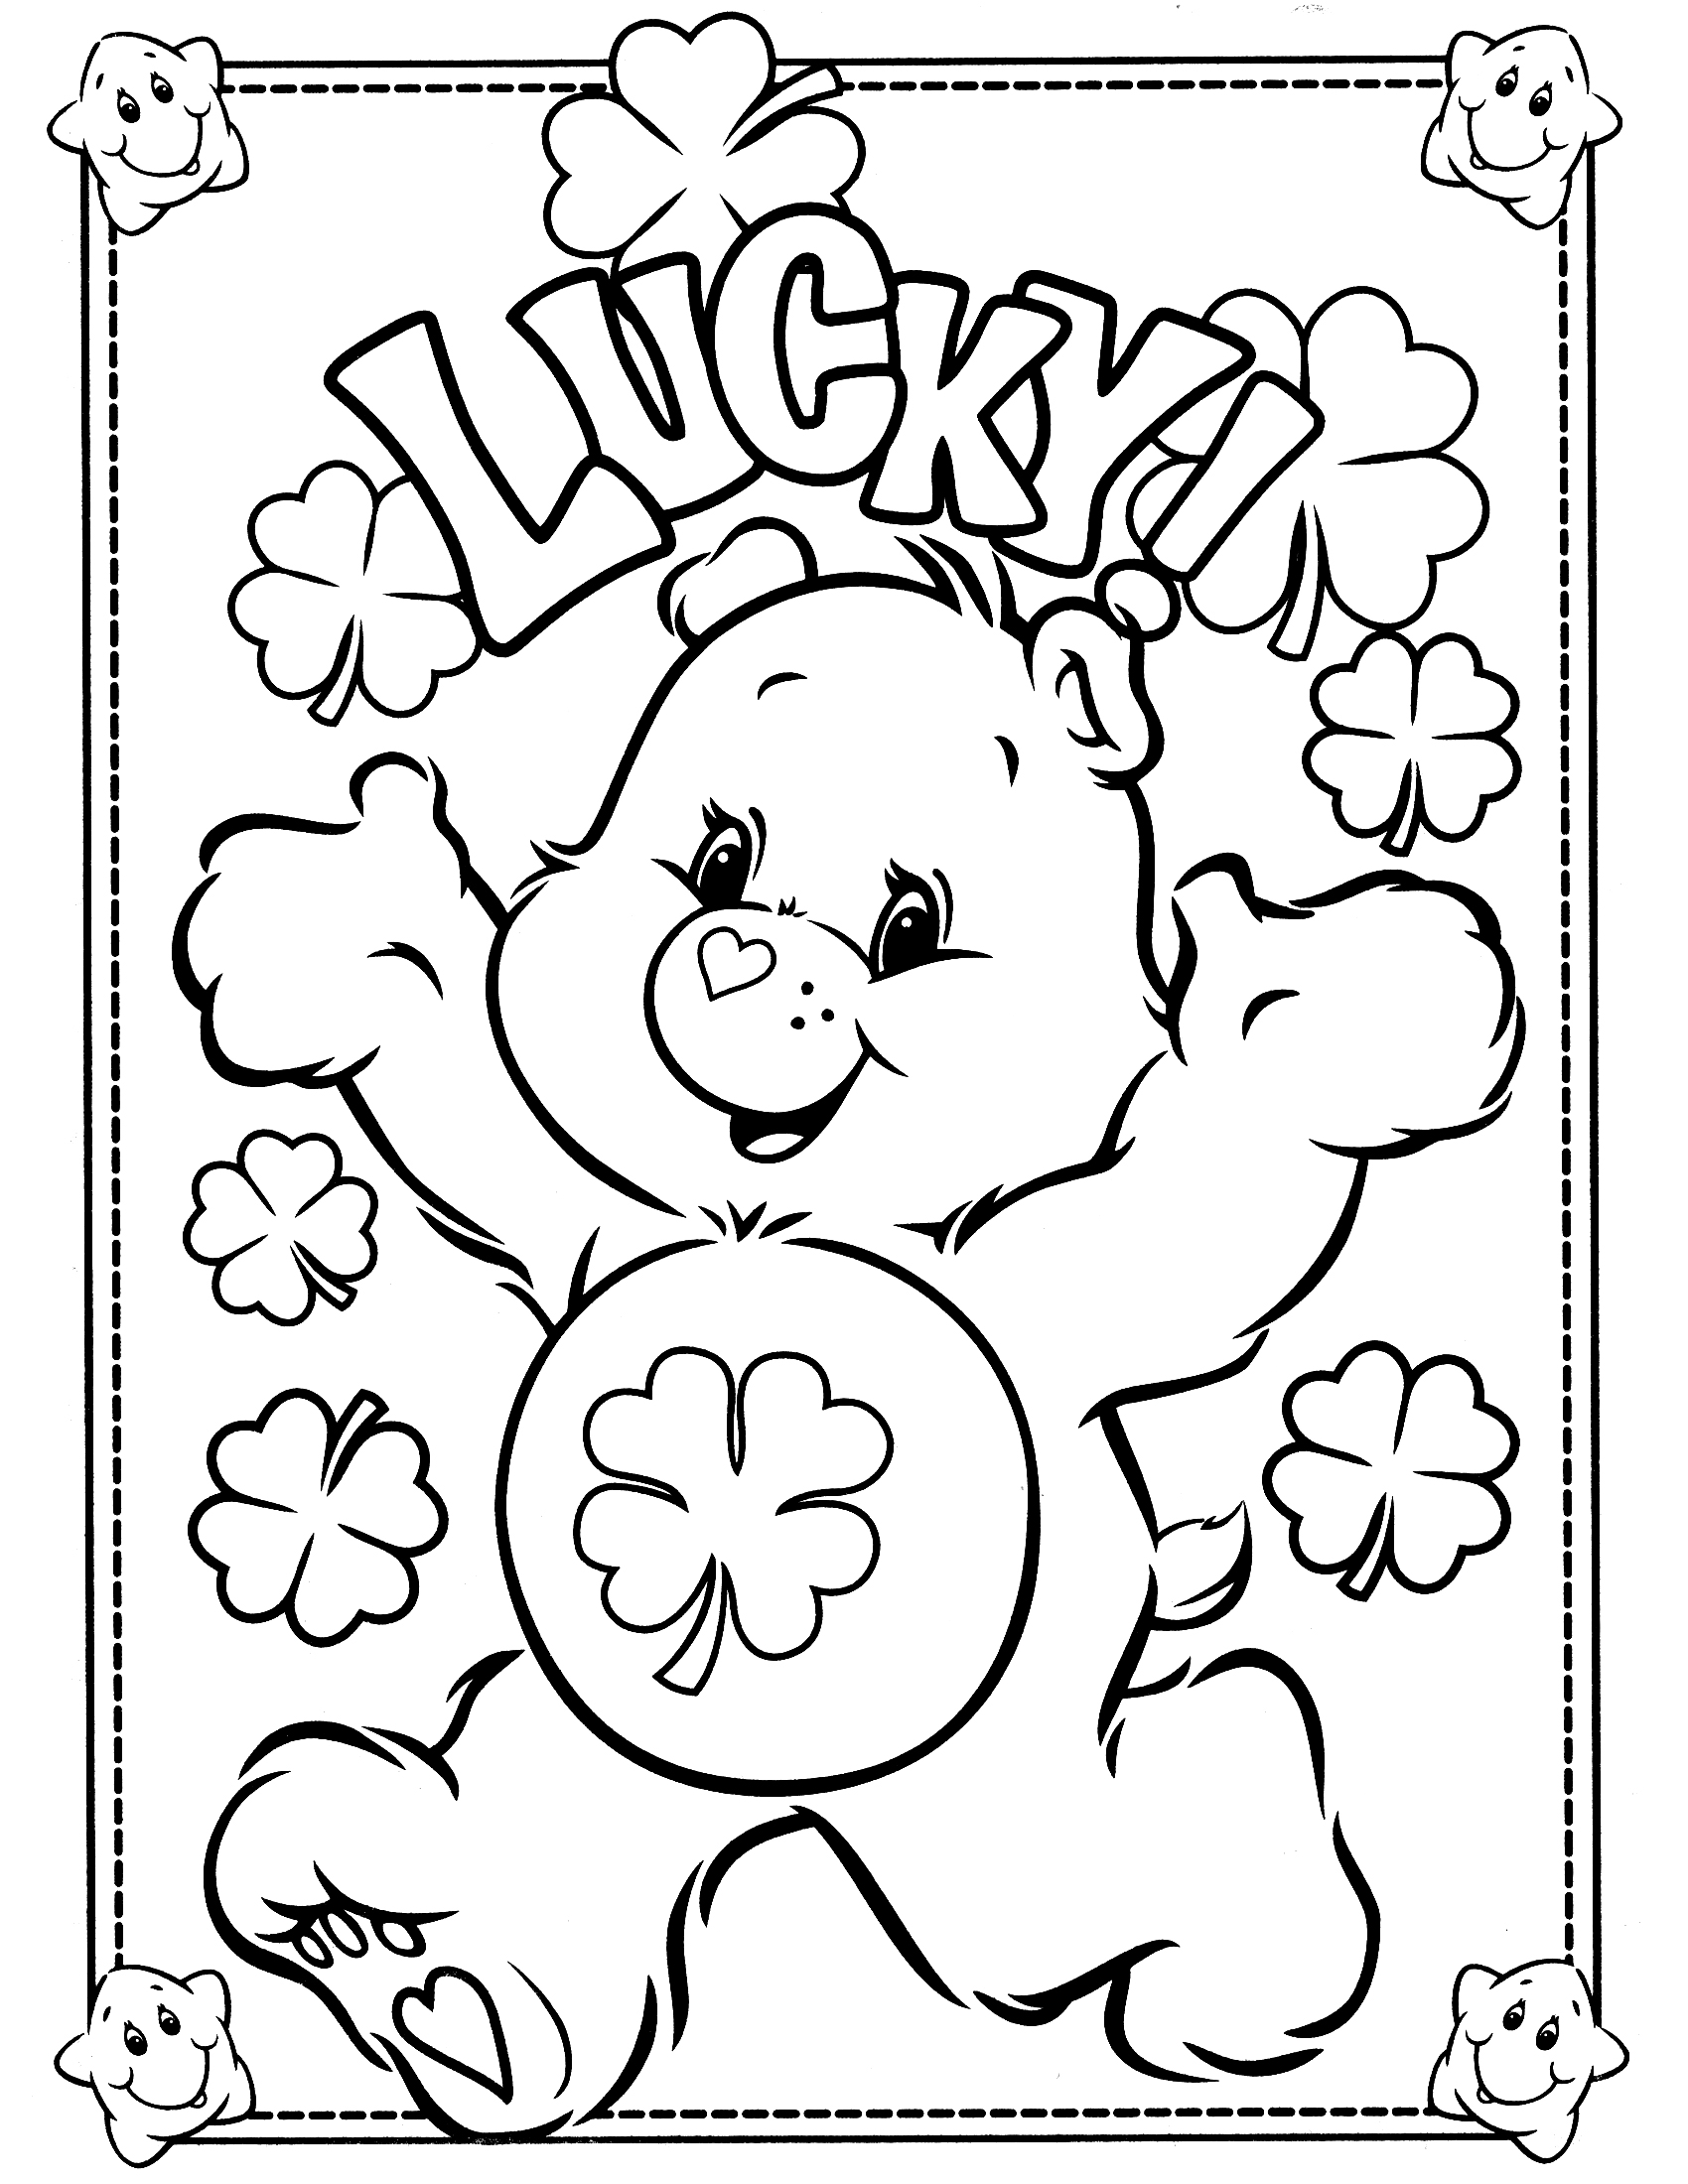 20 Coloring ideas   coloring pages, coloring books, coloring for kids